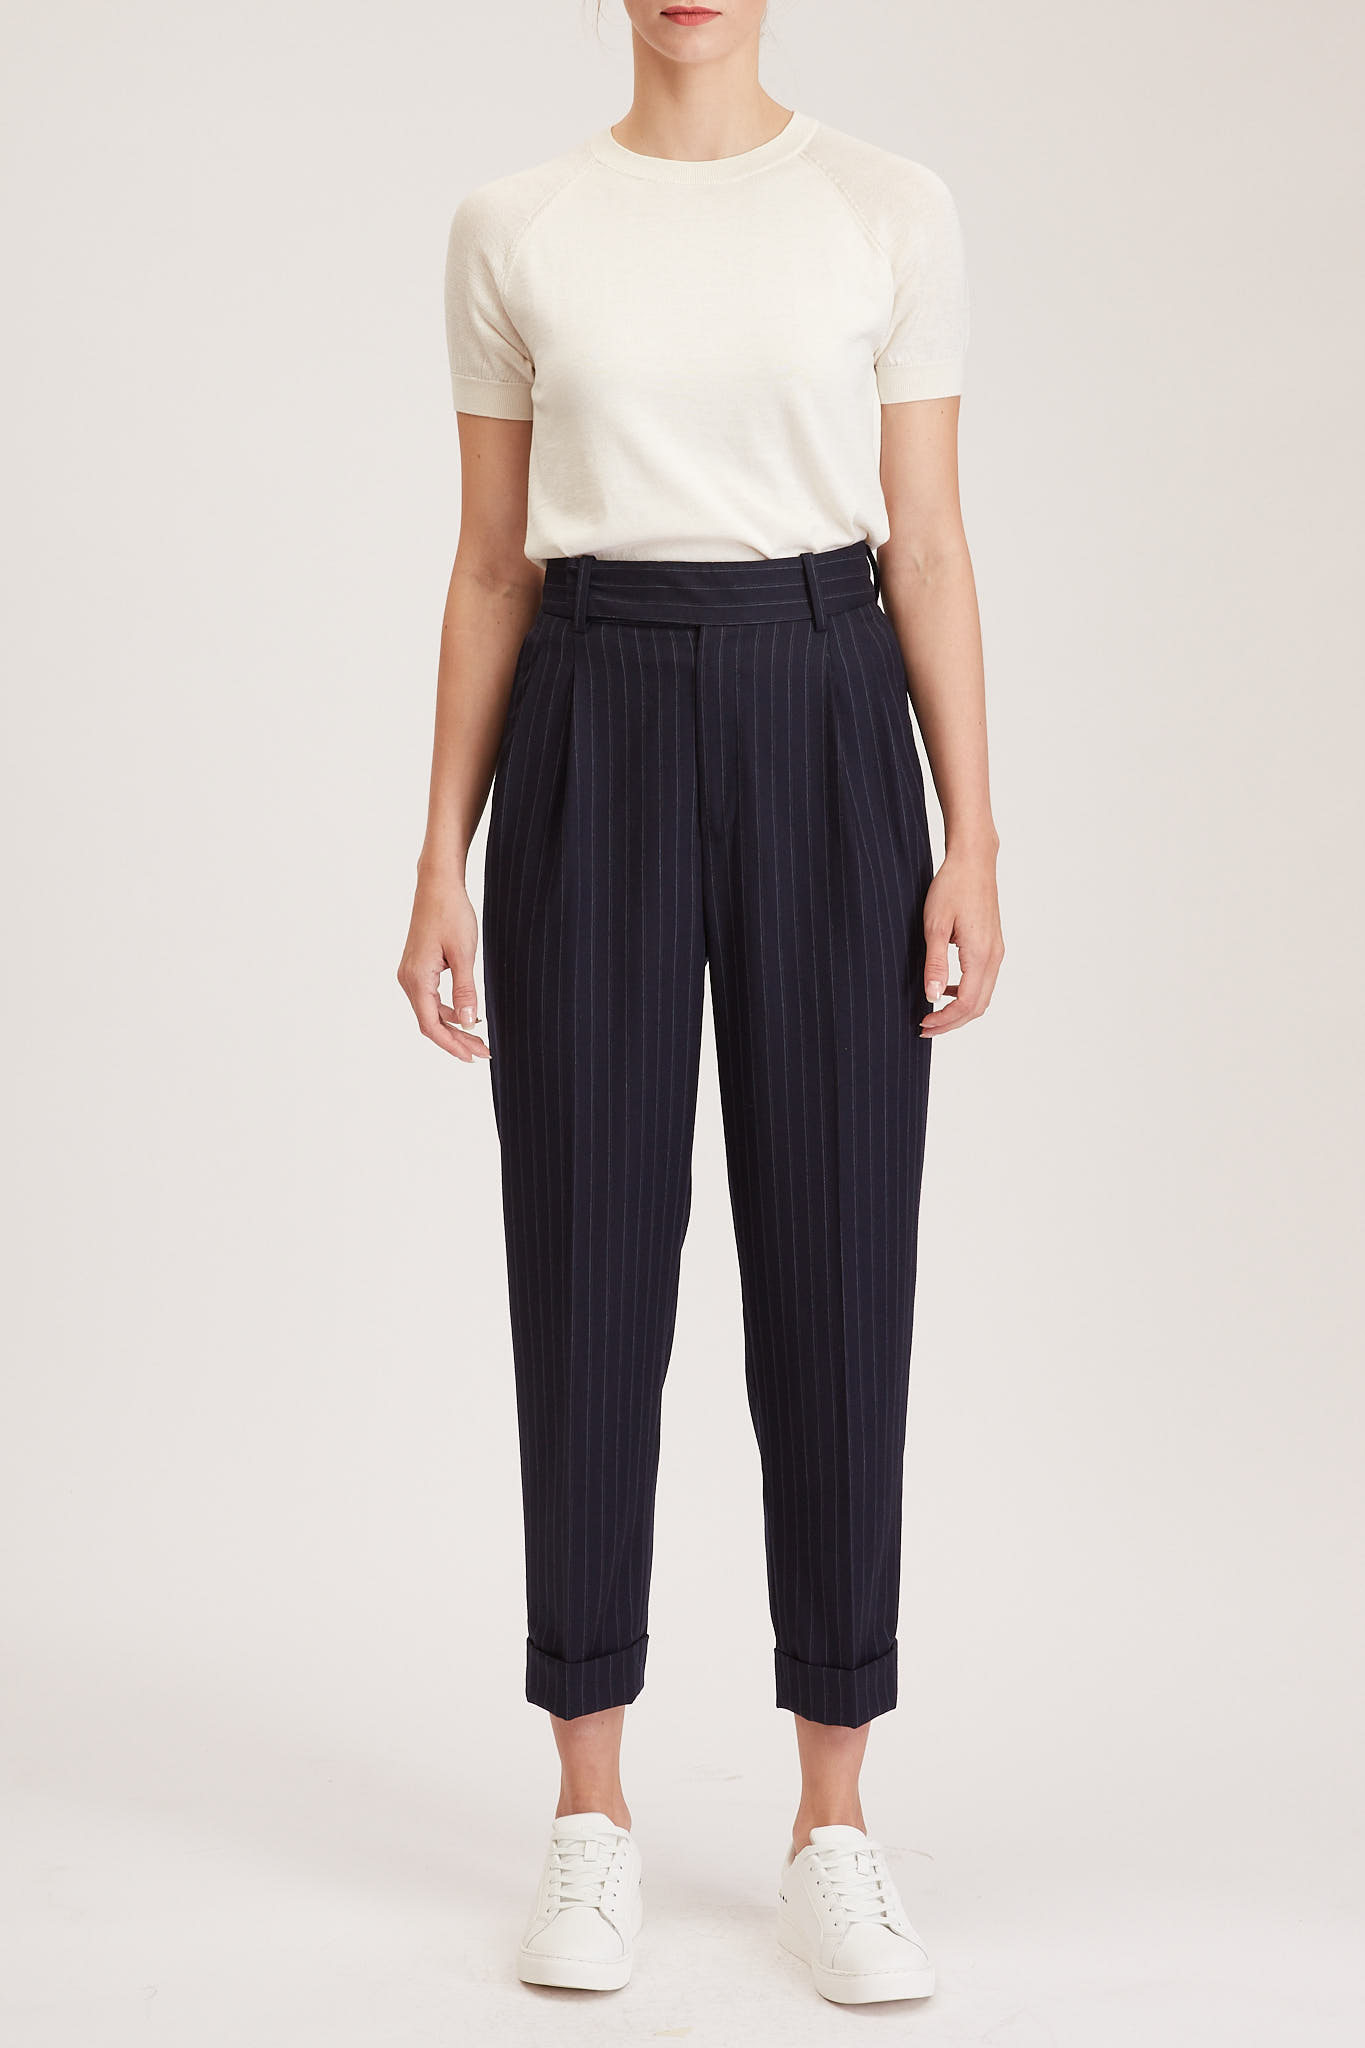 Southampton Trouser – High waisted, pleated trousers in navy pinstripe